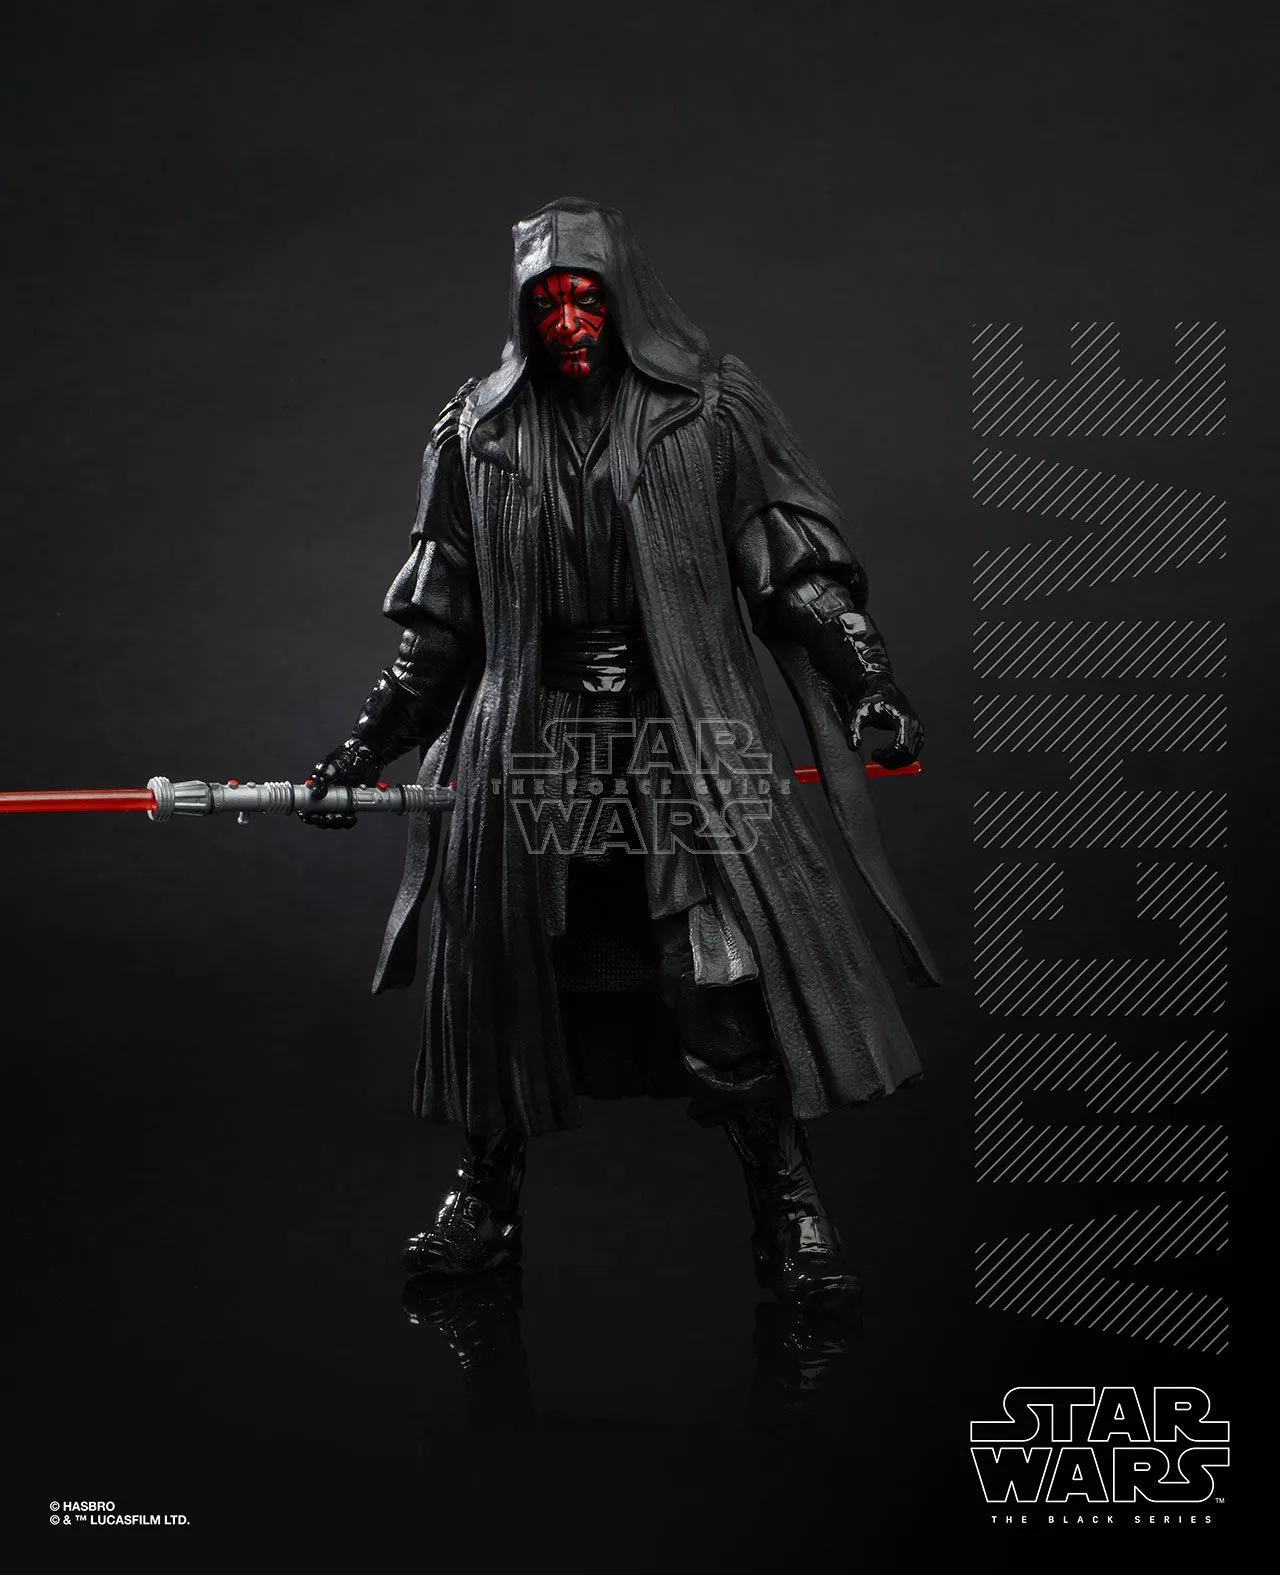 STAR-WARS-THE-BLACK-SERIES-ARCHIVE-6-INCH-Figure-Assortment---Darth-Maul-(oop-1)